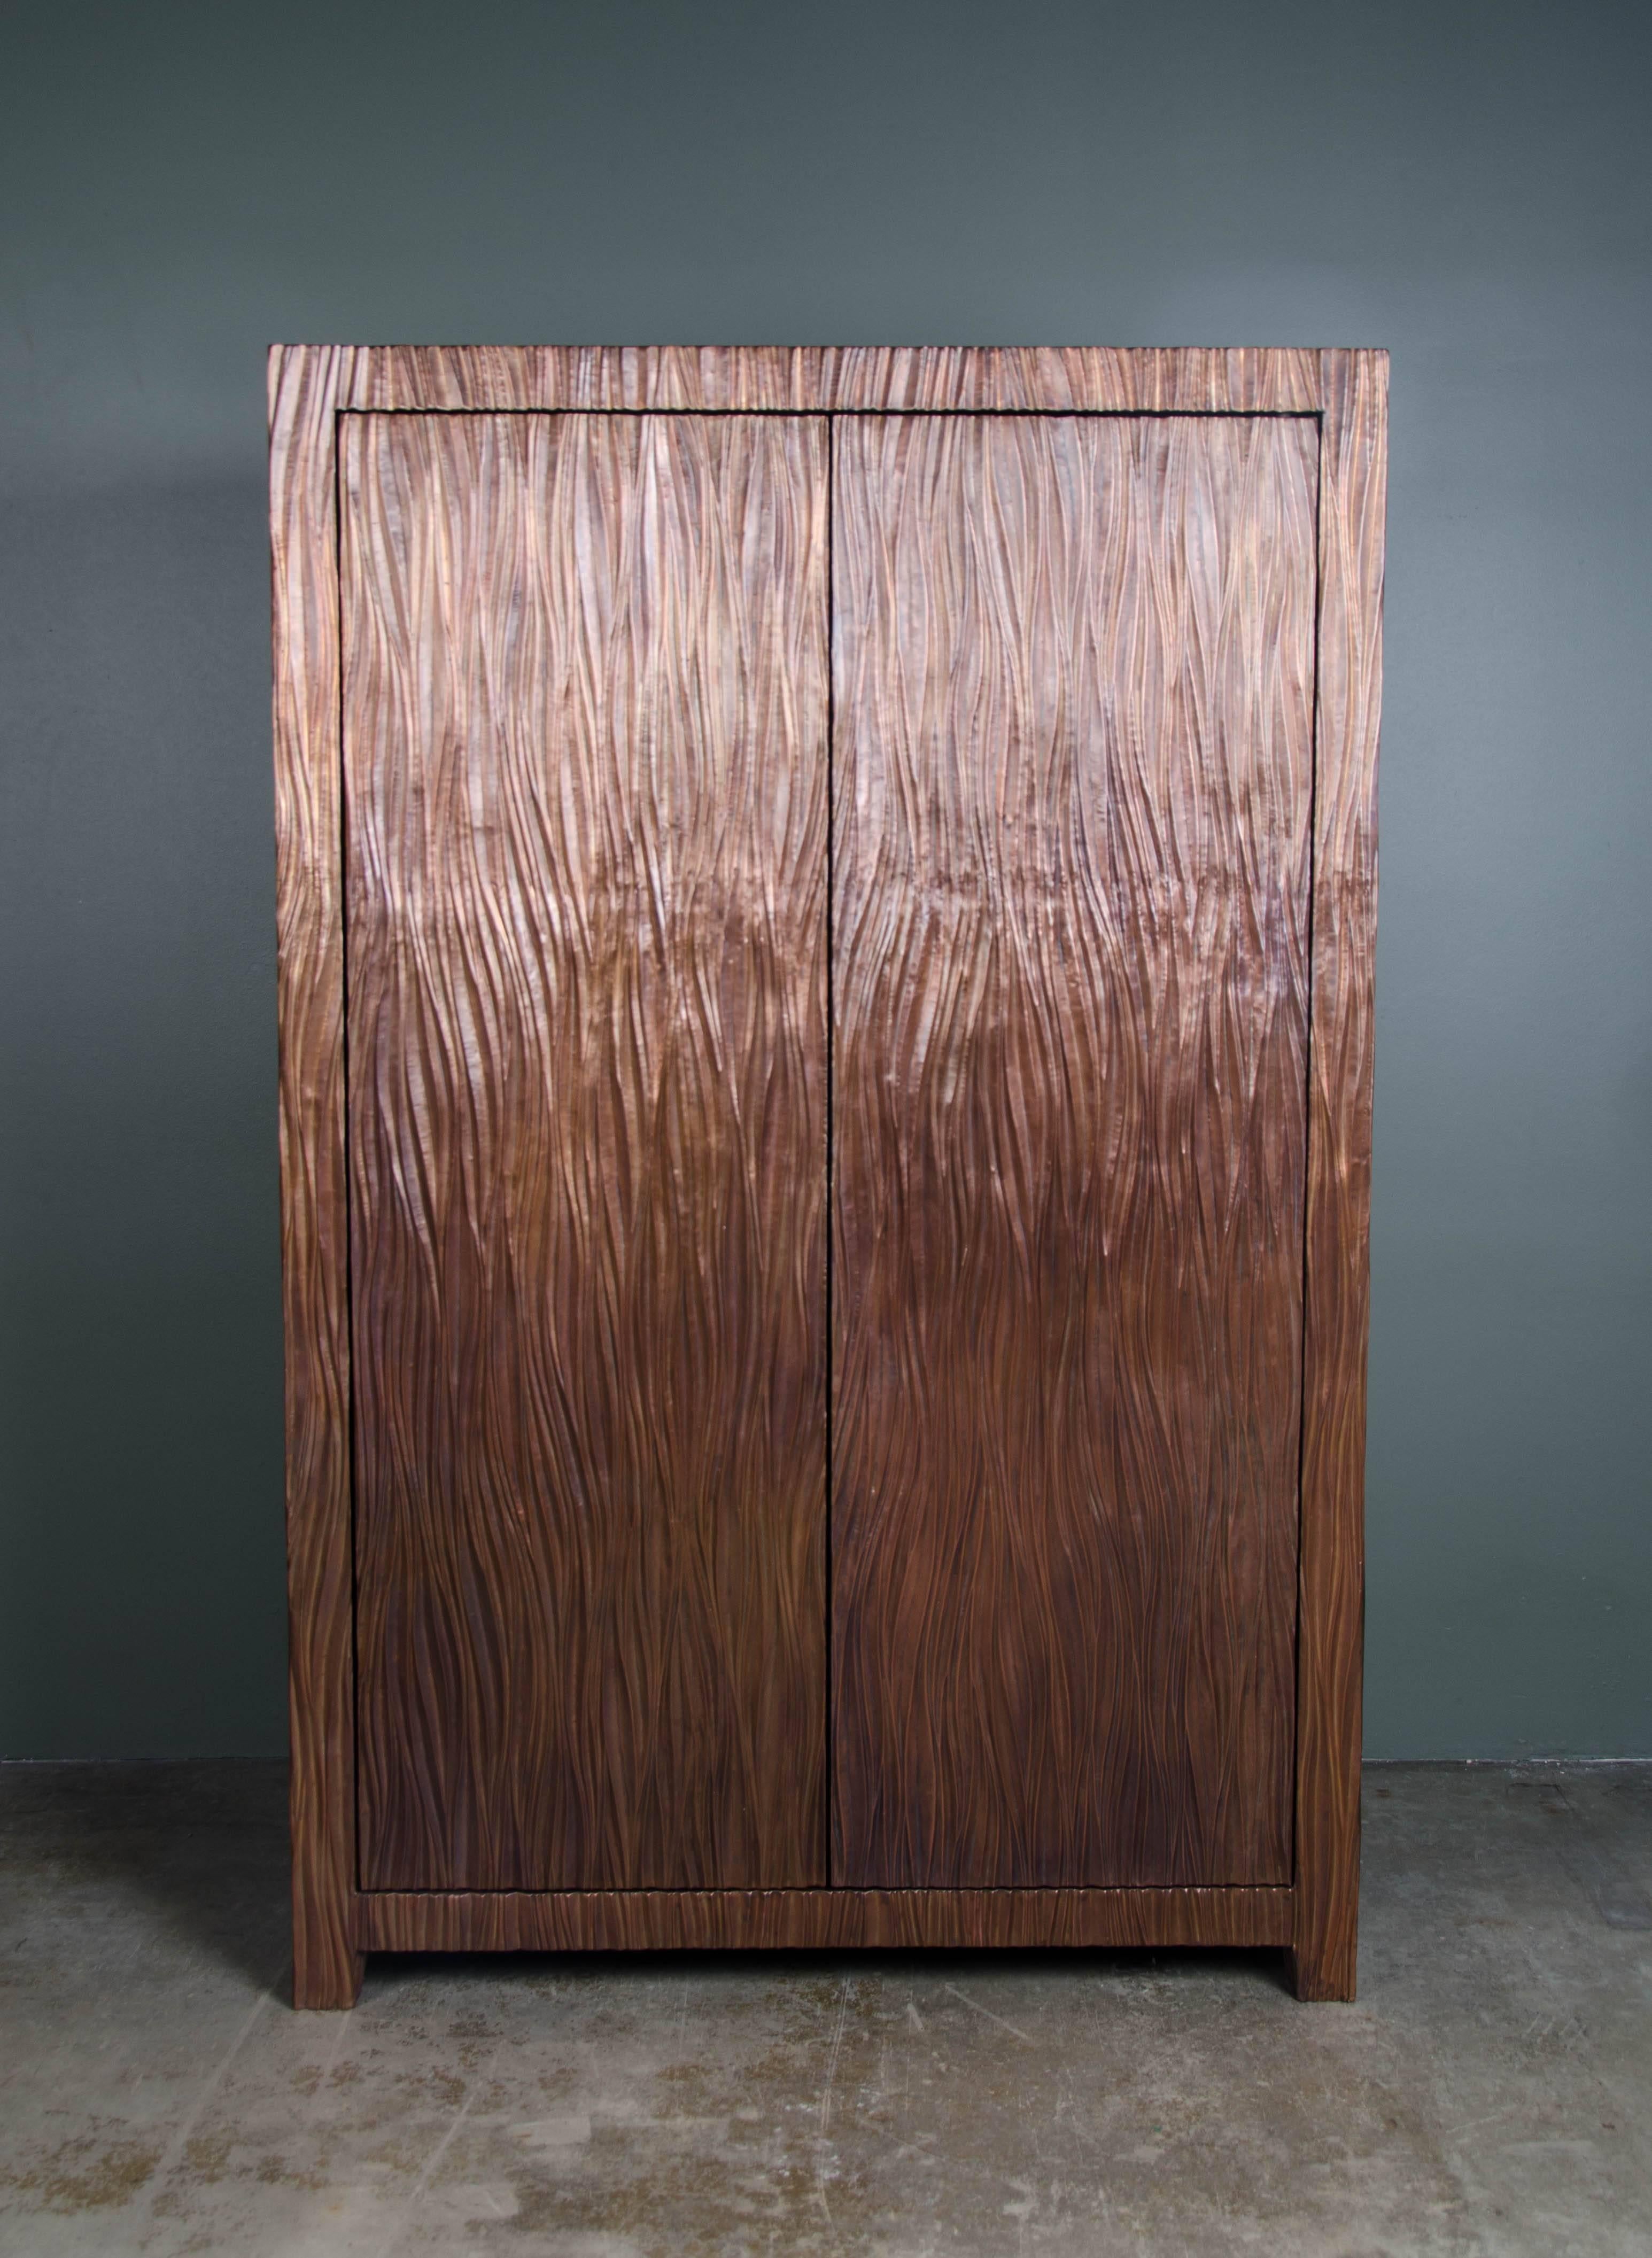 Pleats design armoire.
Hand repoussé copper
Antique copper finish
Wood interior 
Limited Edition
Customizable

Repoussé is the traditional art of hand-hammering decorative relief onto sheet metal. The technique originated around 800 BC between